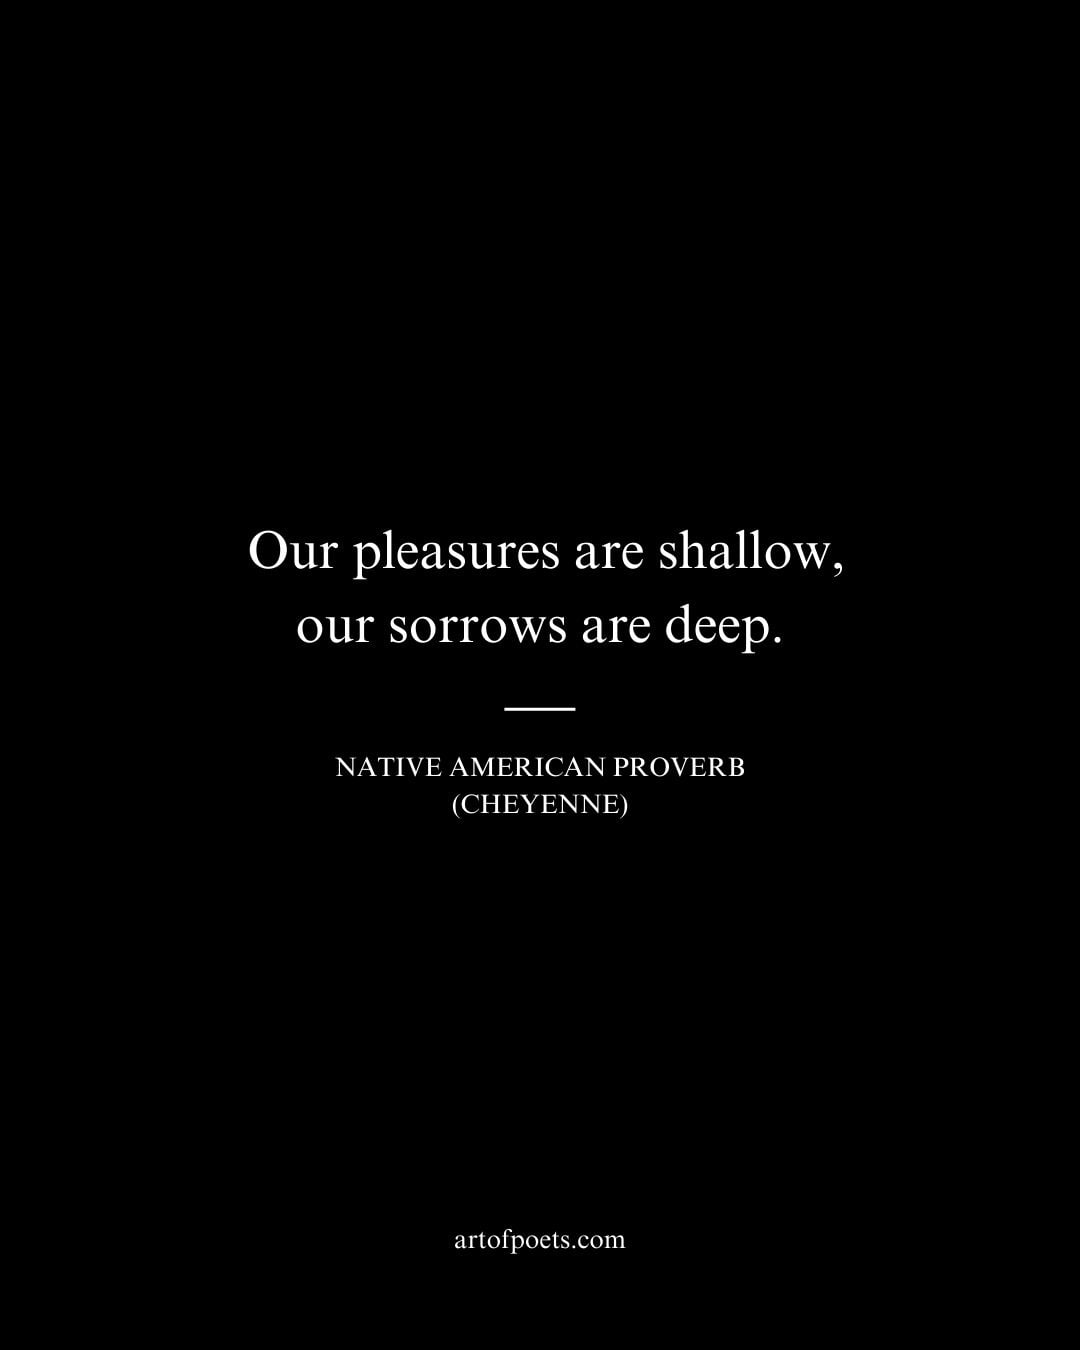 Our pleasures are shallow our sorrows are deep